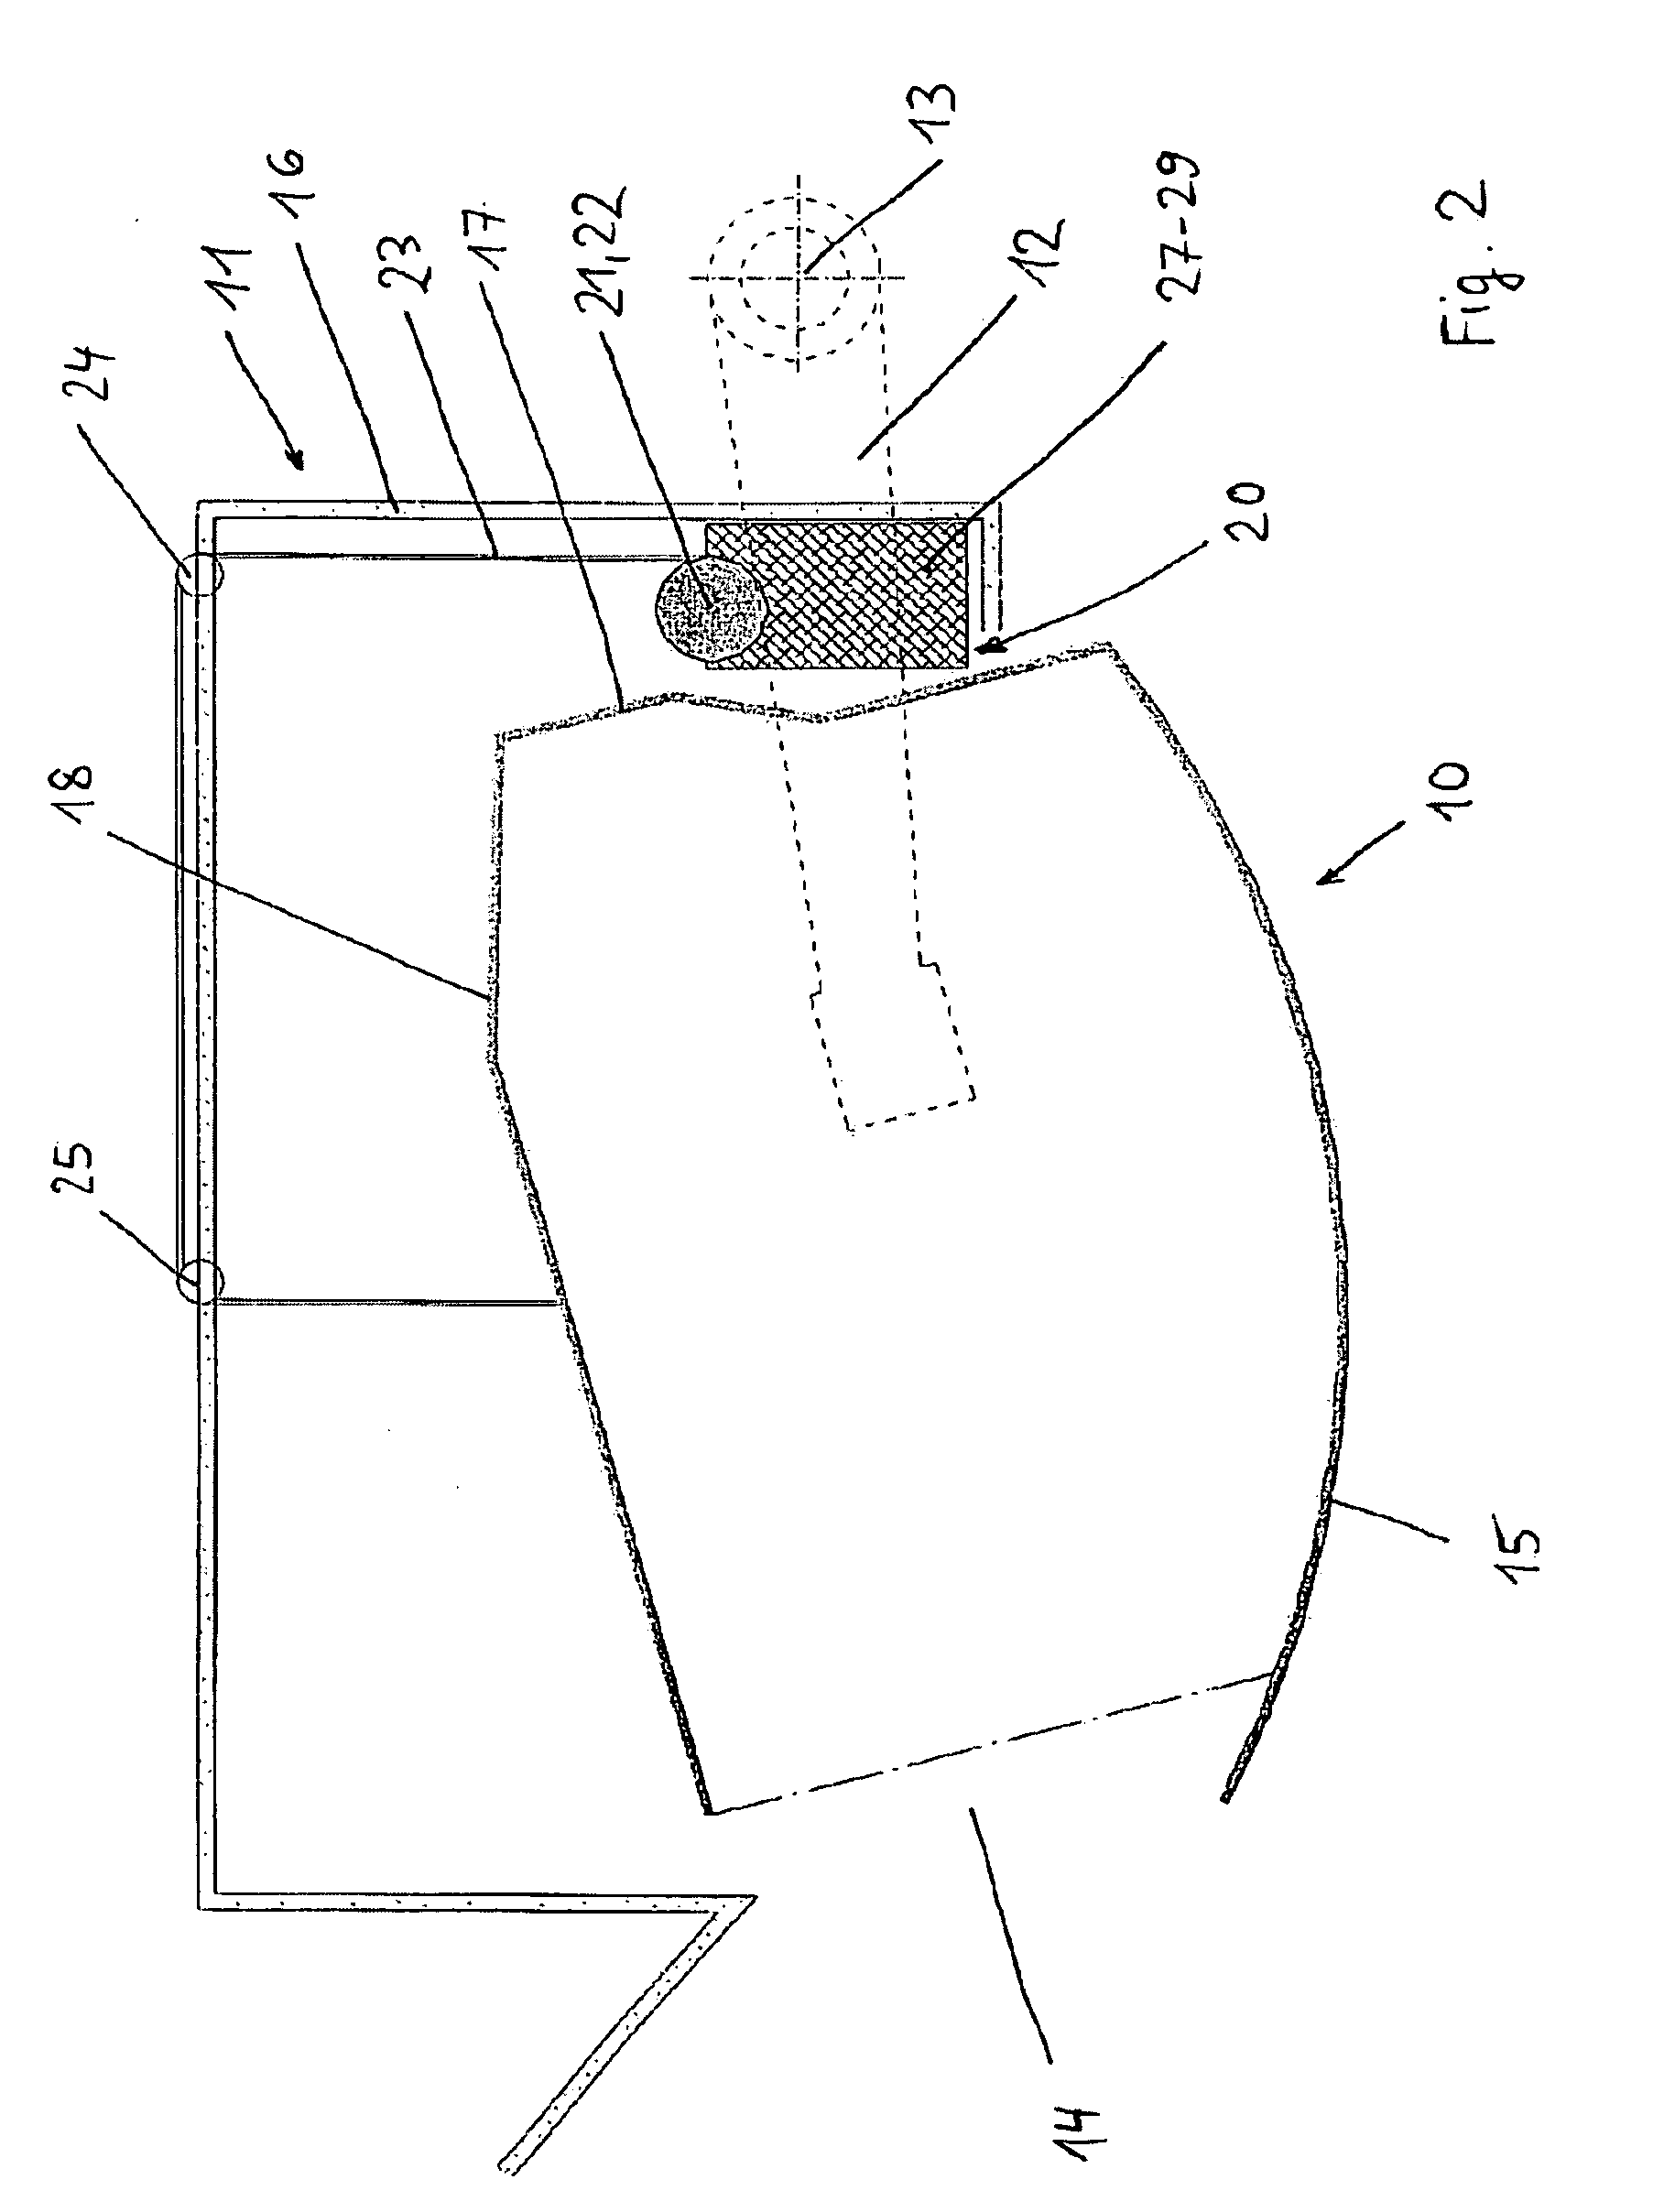 Lifting device for a luggage compartment in an aircraft, as well as aircraft with a lifting device for a luggage compartment